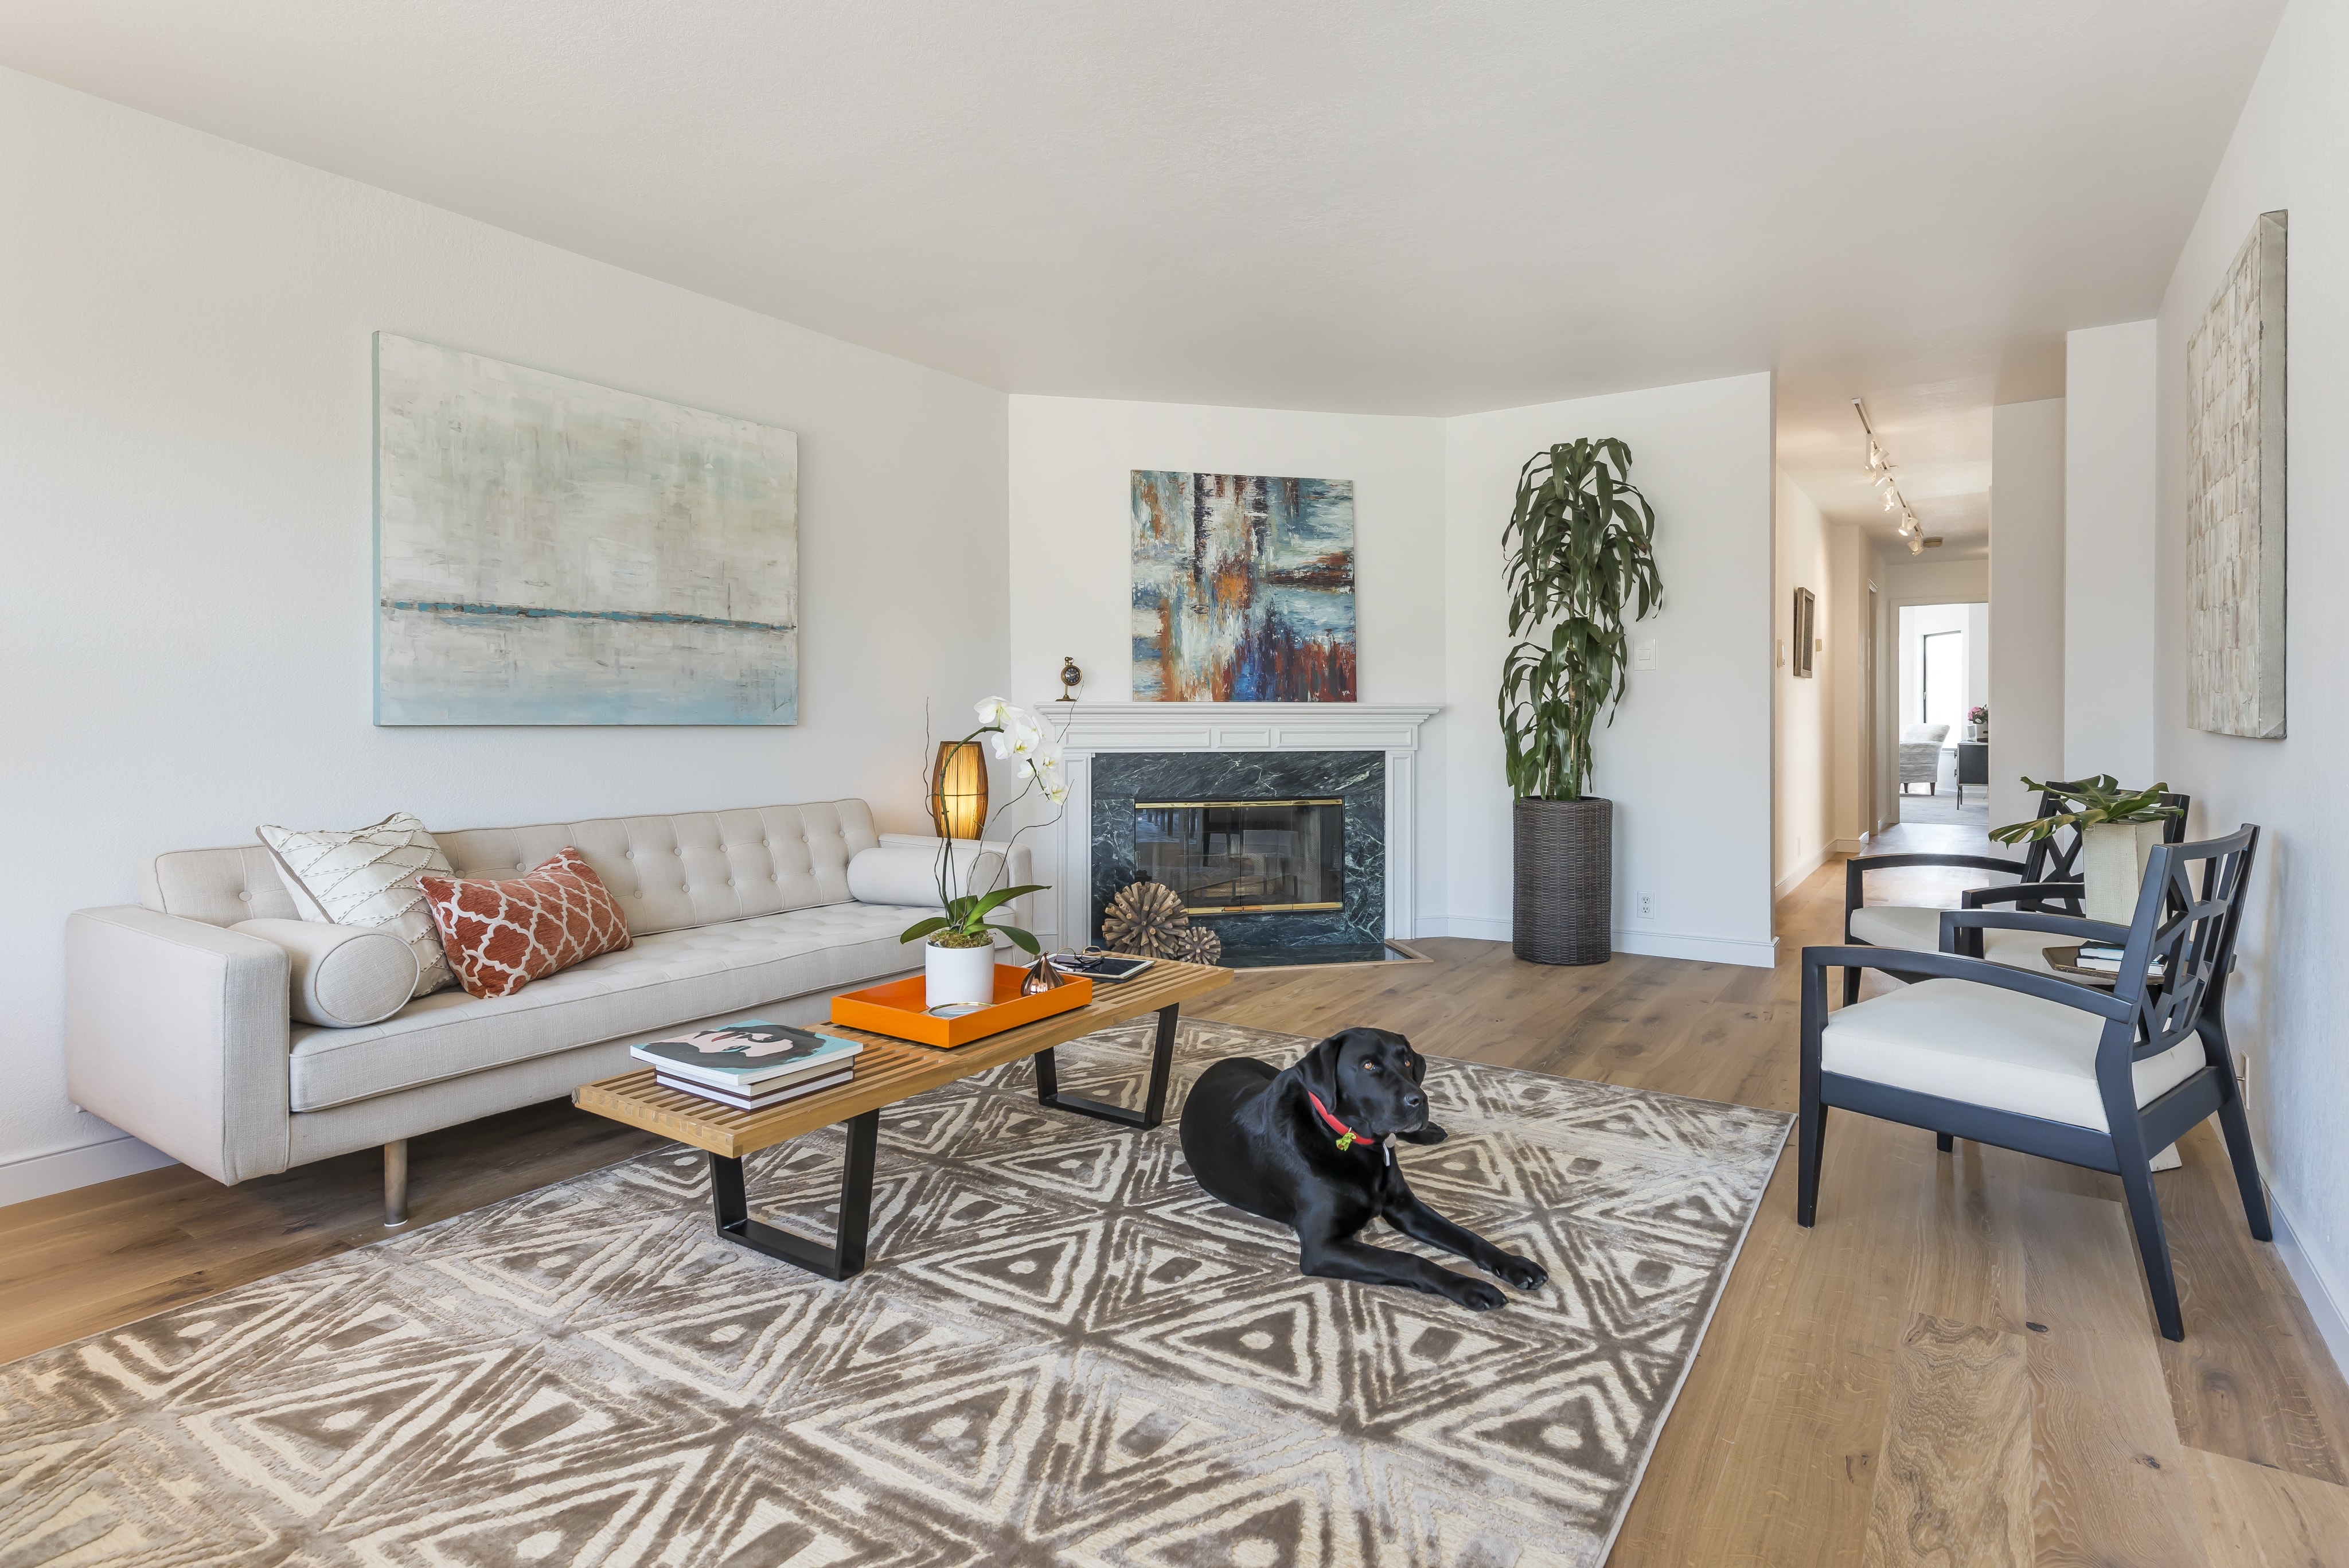 Mr. Raffi demonstrates what the kid-on-the-rug-in-front-of-fireplace-picture may look like for you at 375 15th Avenue